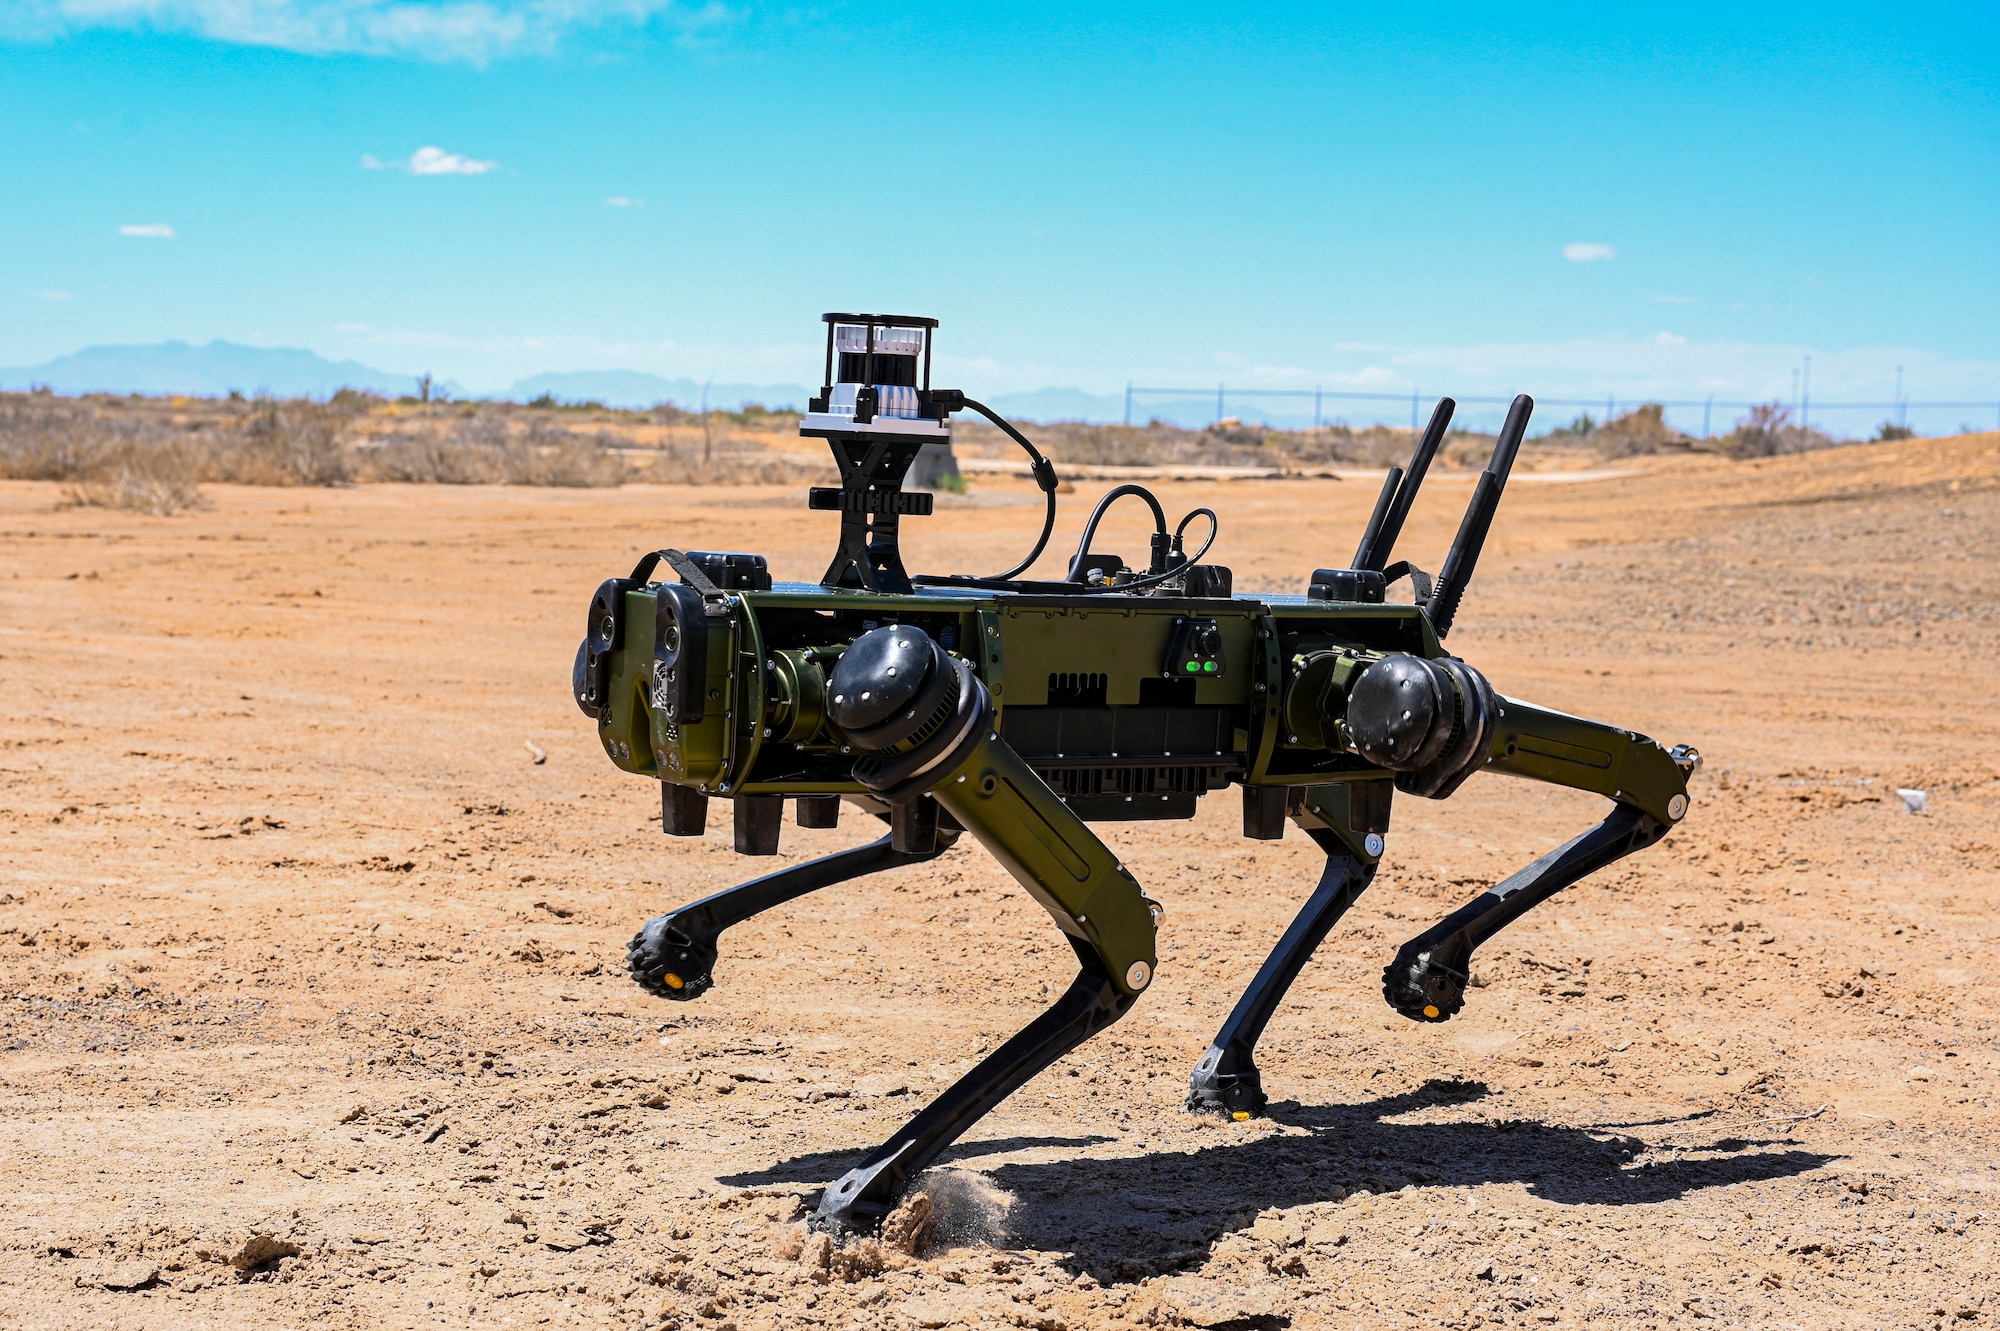 A Vision 60 Q-UGV ground robot does a simulated route mission at Holloman Air Force Base, New Mexico, April 17, 2023. The Vision 60 is a quadrupedal ground robot that is capable of maneuvering through rough terrains, making it perfect for patrolling Holloman’s arid environment. (U.S. Air Force photo by Airman 1st Class Isaiah Pedrazzini)